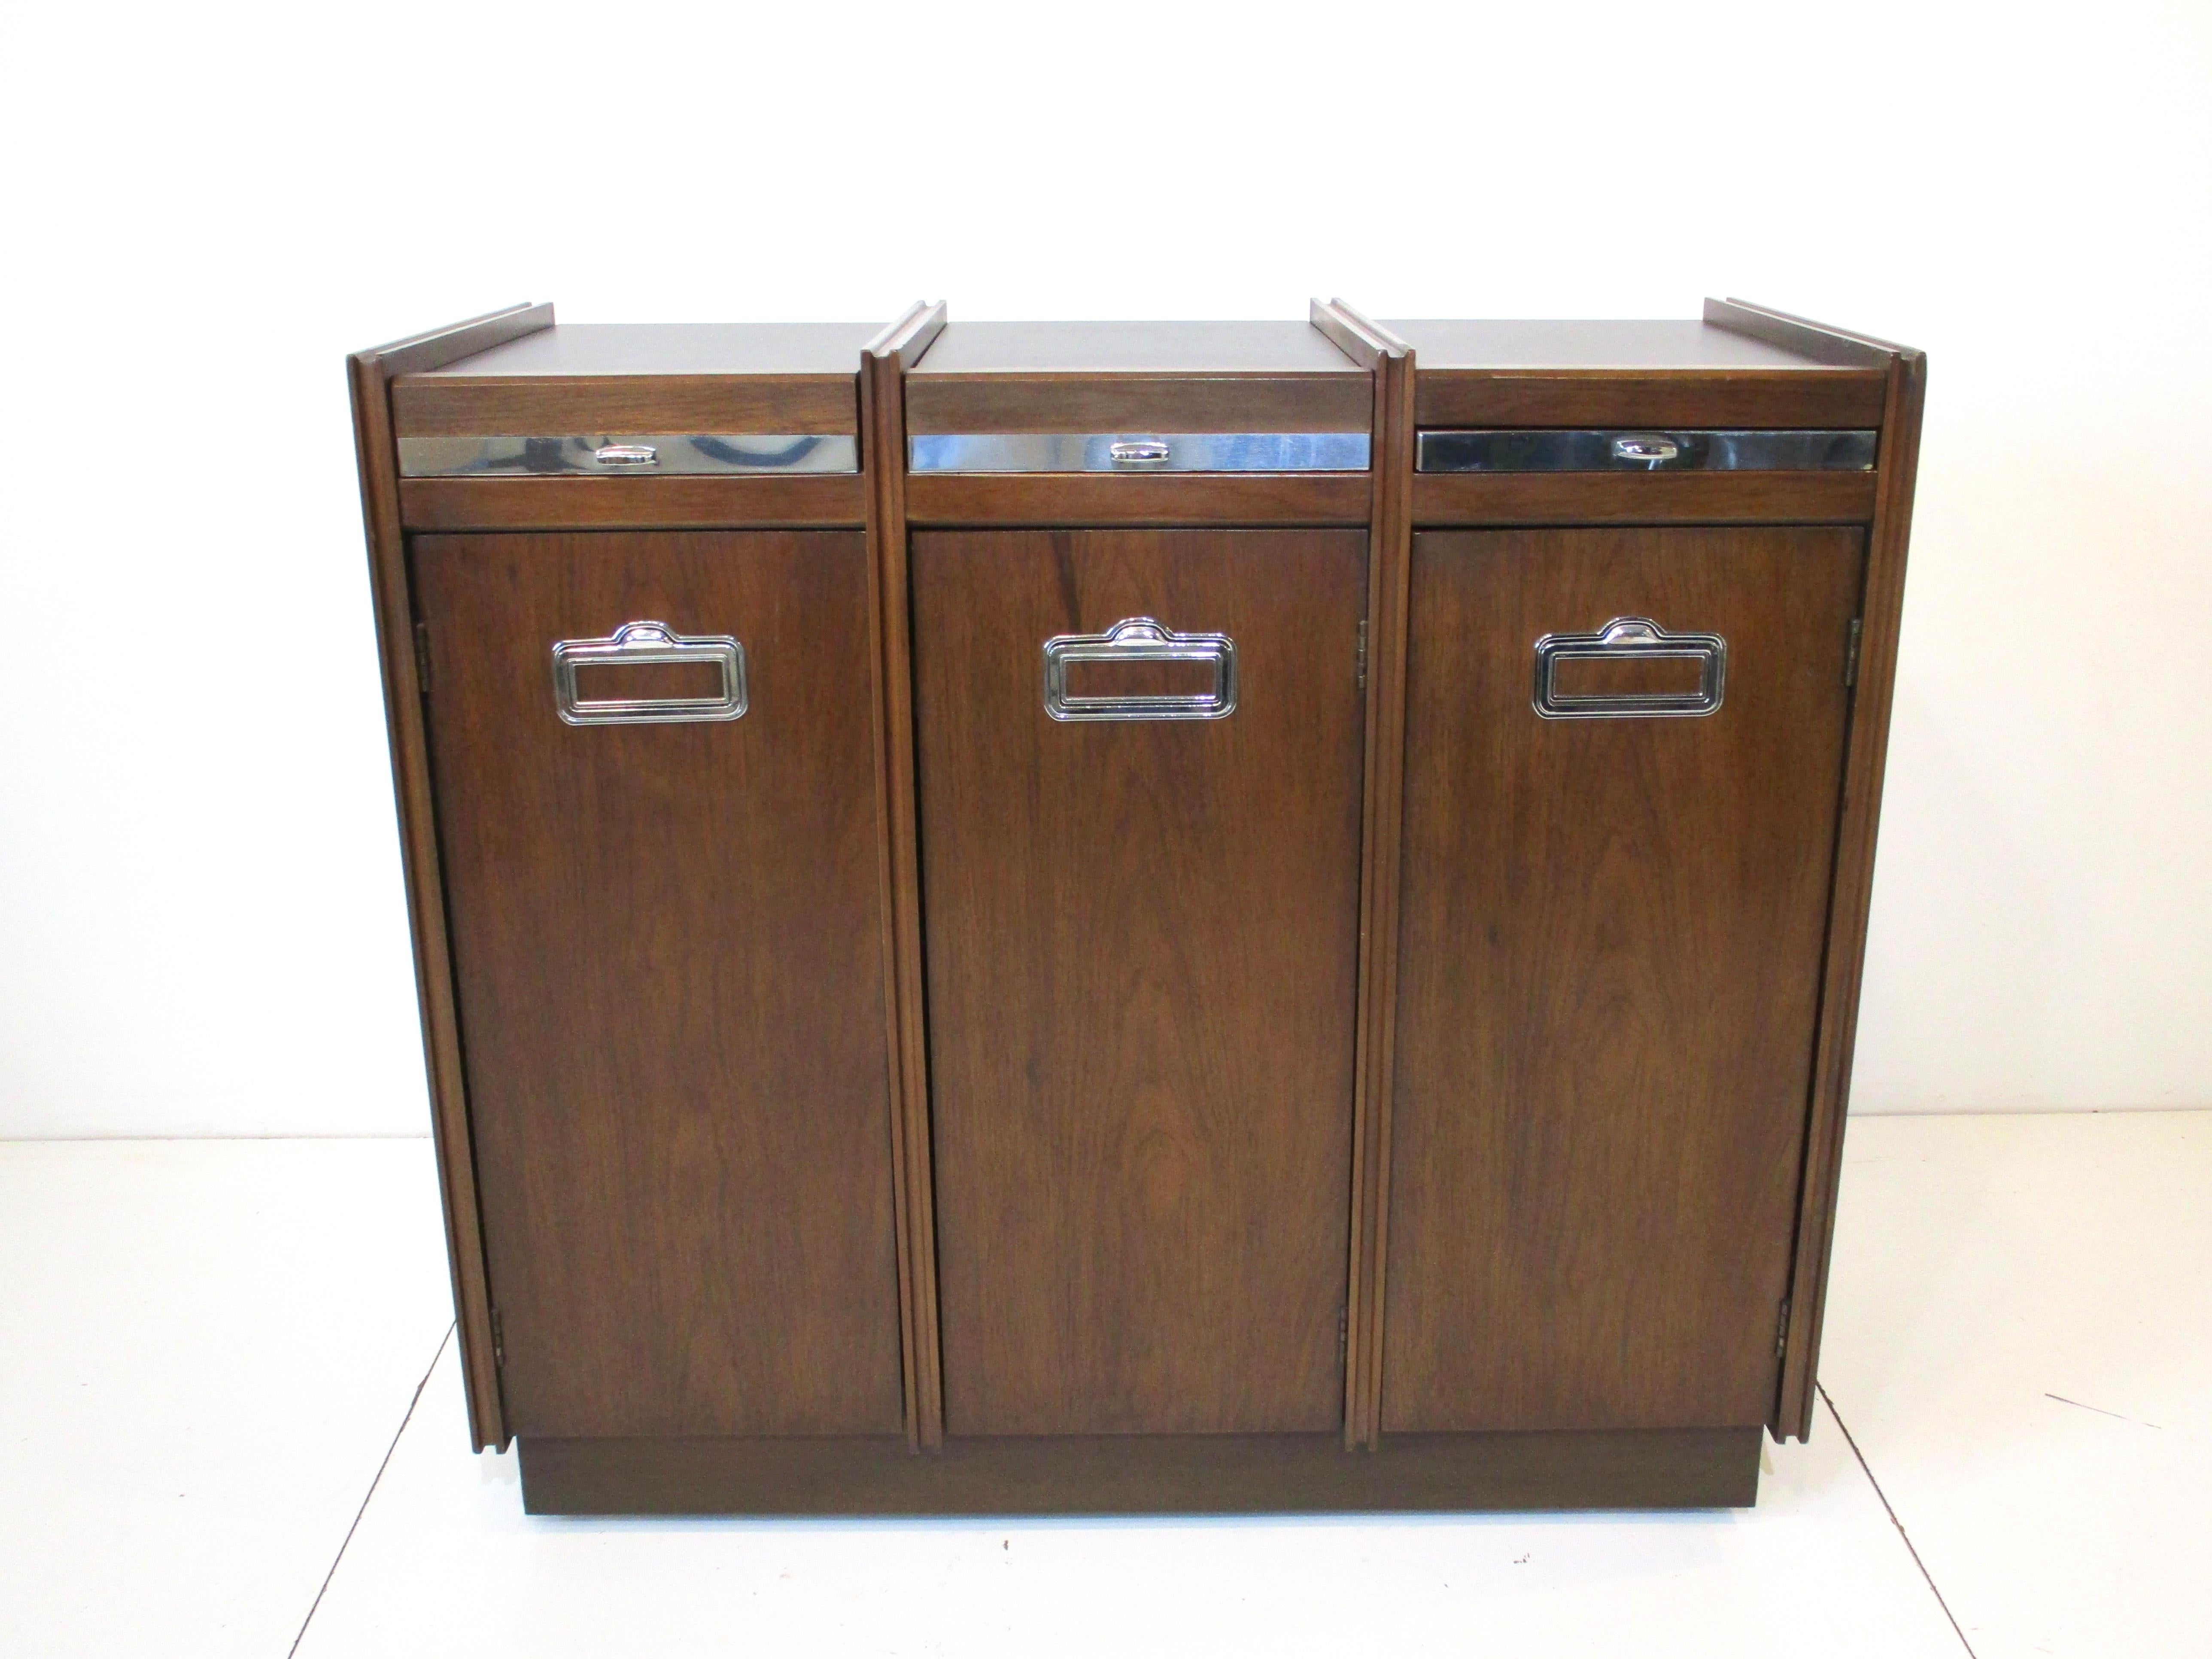 A very versatile dark mahogany rolling bar serving cabinet with laminate top having three functions. The first and second are flip up lids that reveal serving wear storage the second has a storage compartment, the third has a pull out mixing